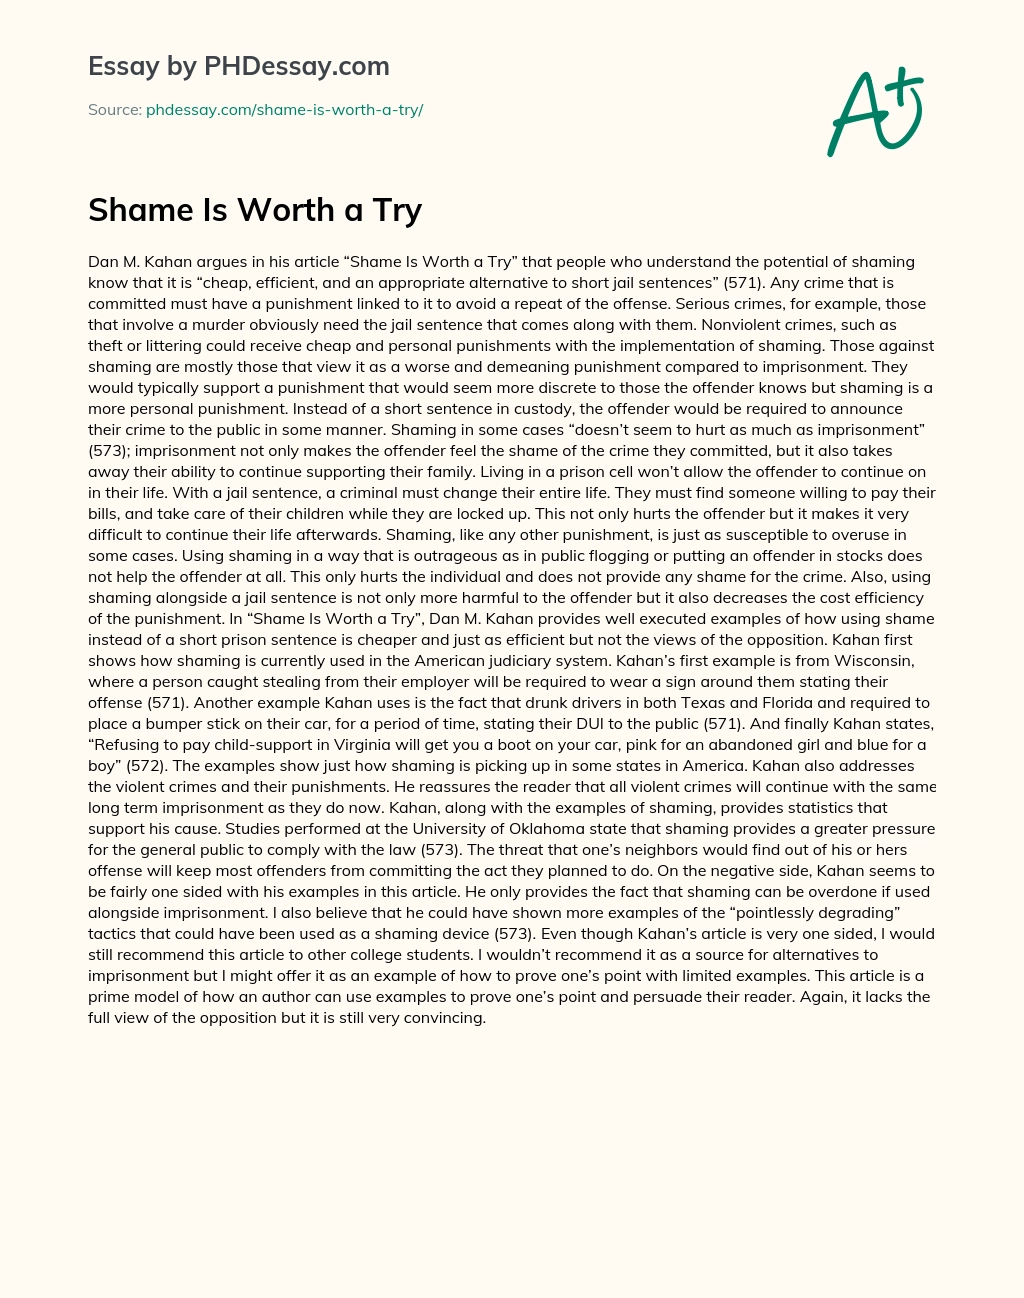 Shame Is Worth a Try essay